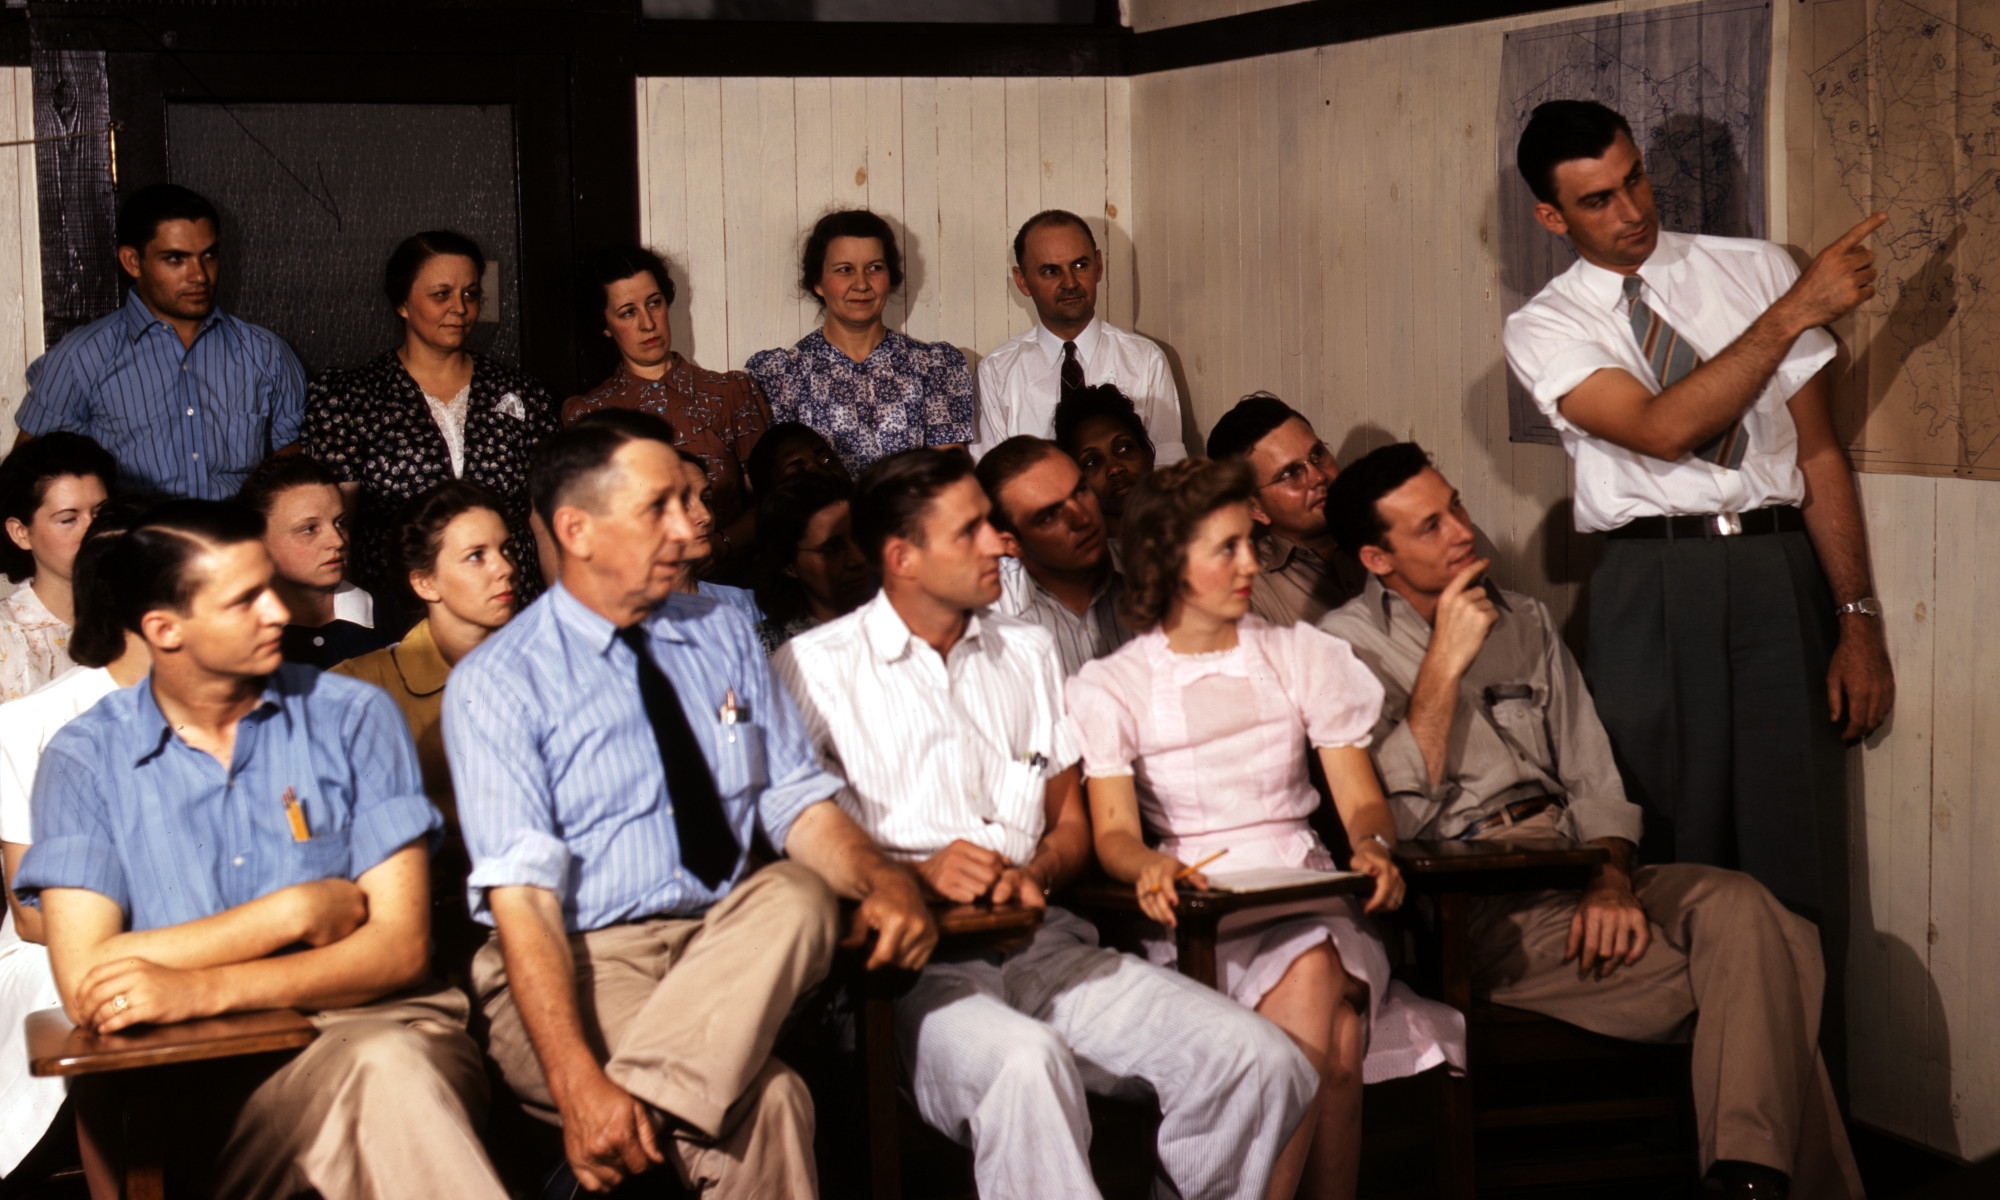 Photograph from the forties of people attending a presentation